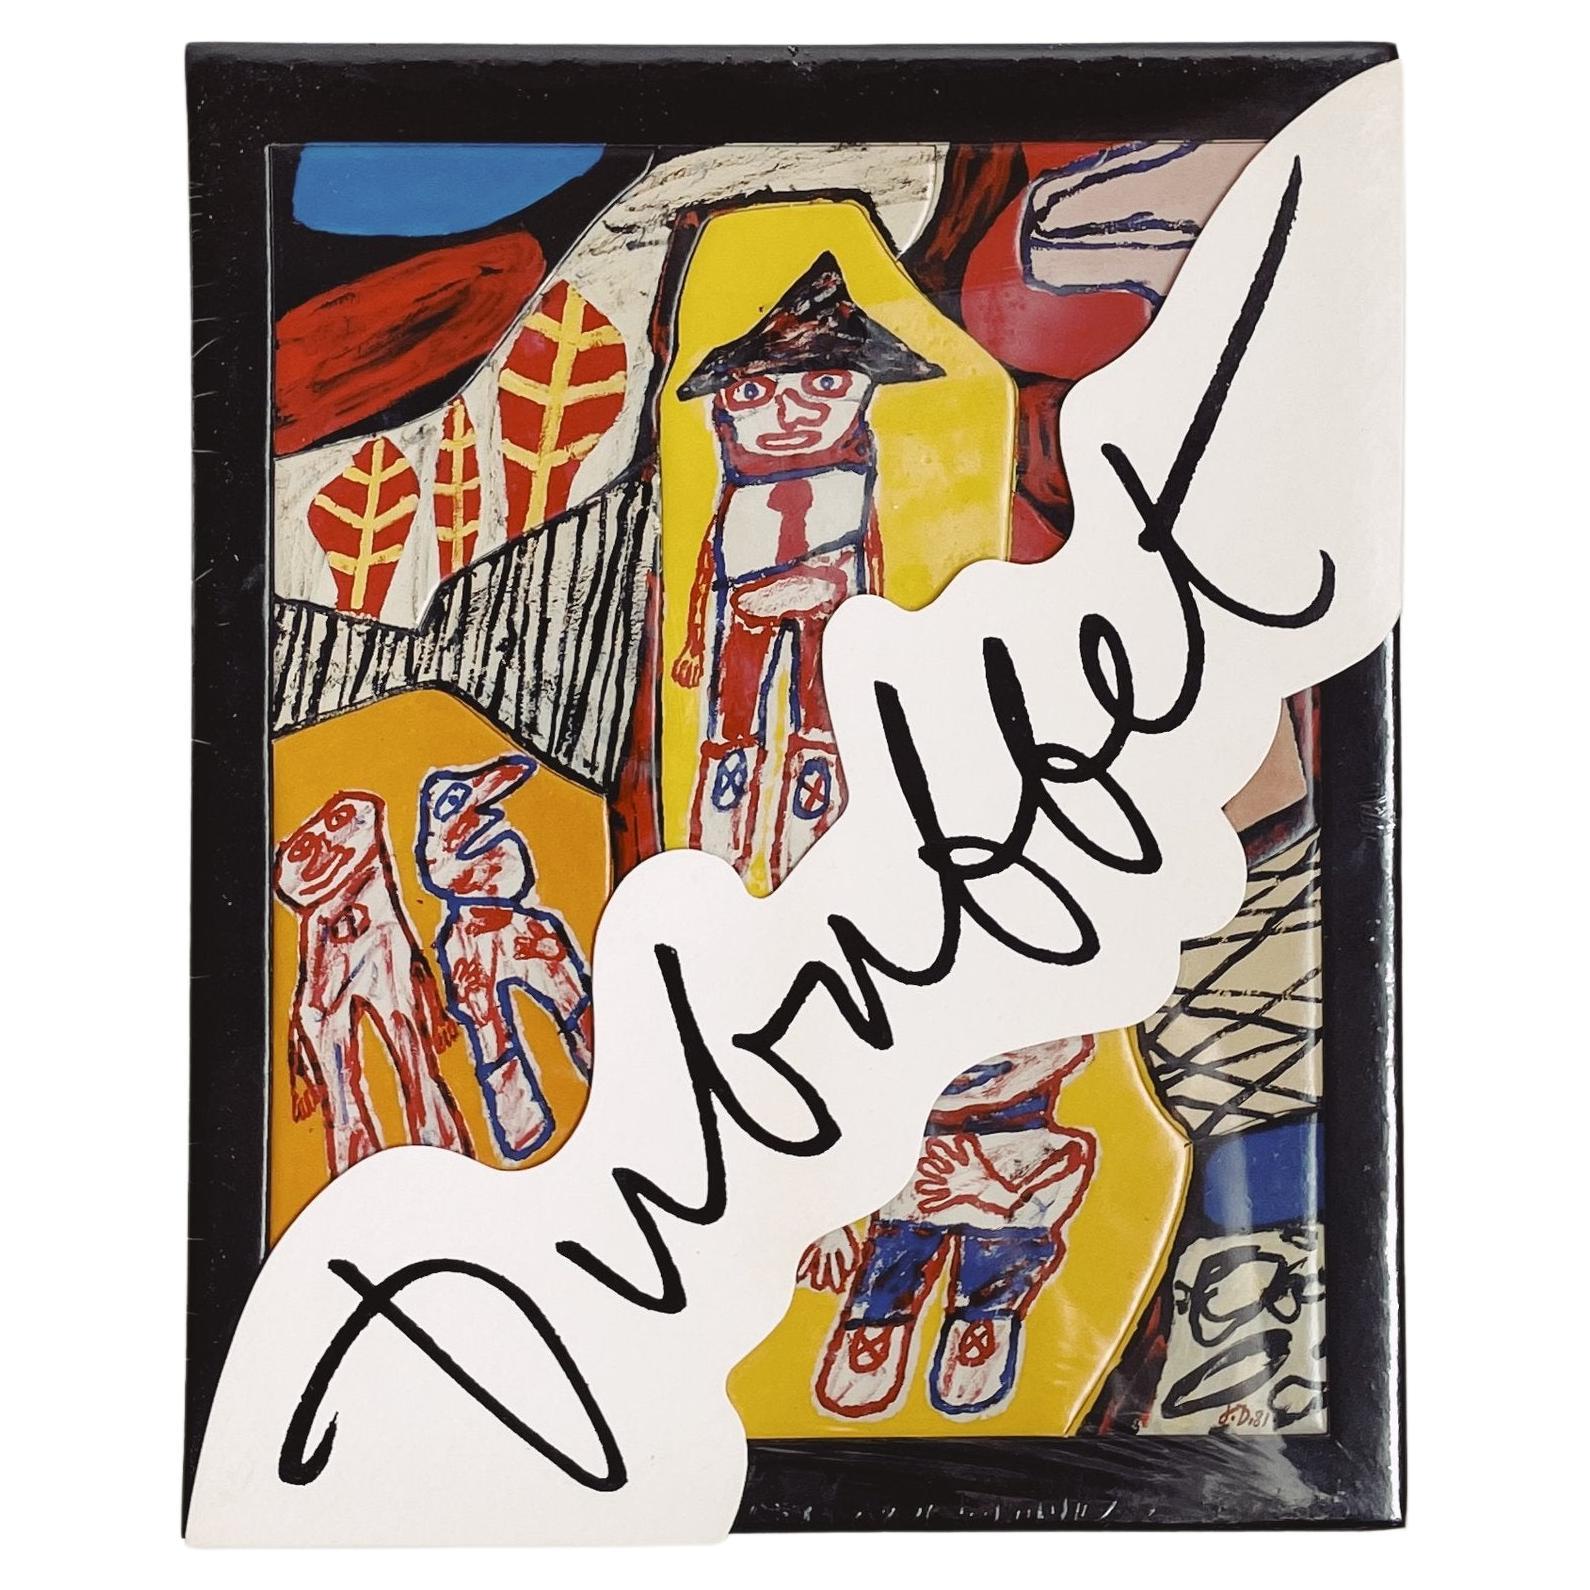 Jean Dubuffet Partitions 1980-1981 / Psycho-Sites Puzzle and Exhibition Catalog